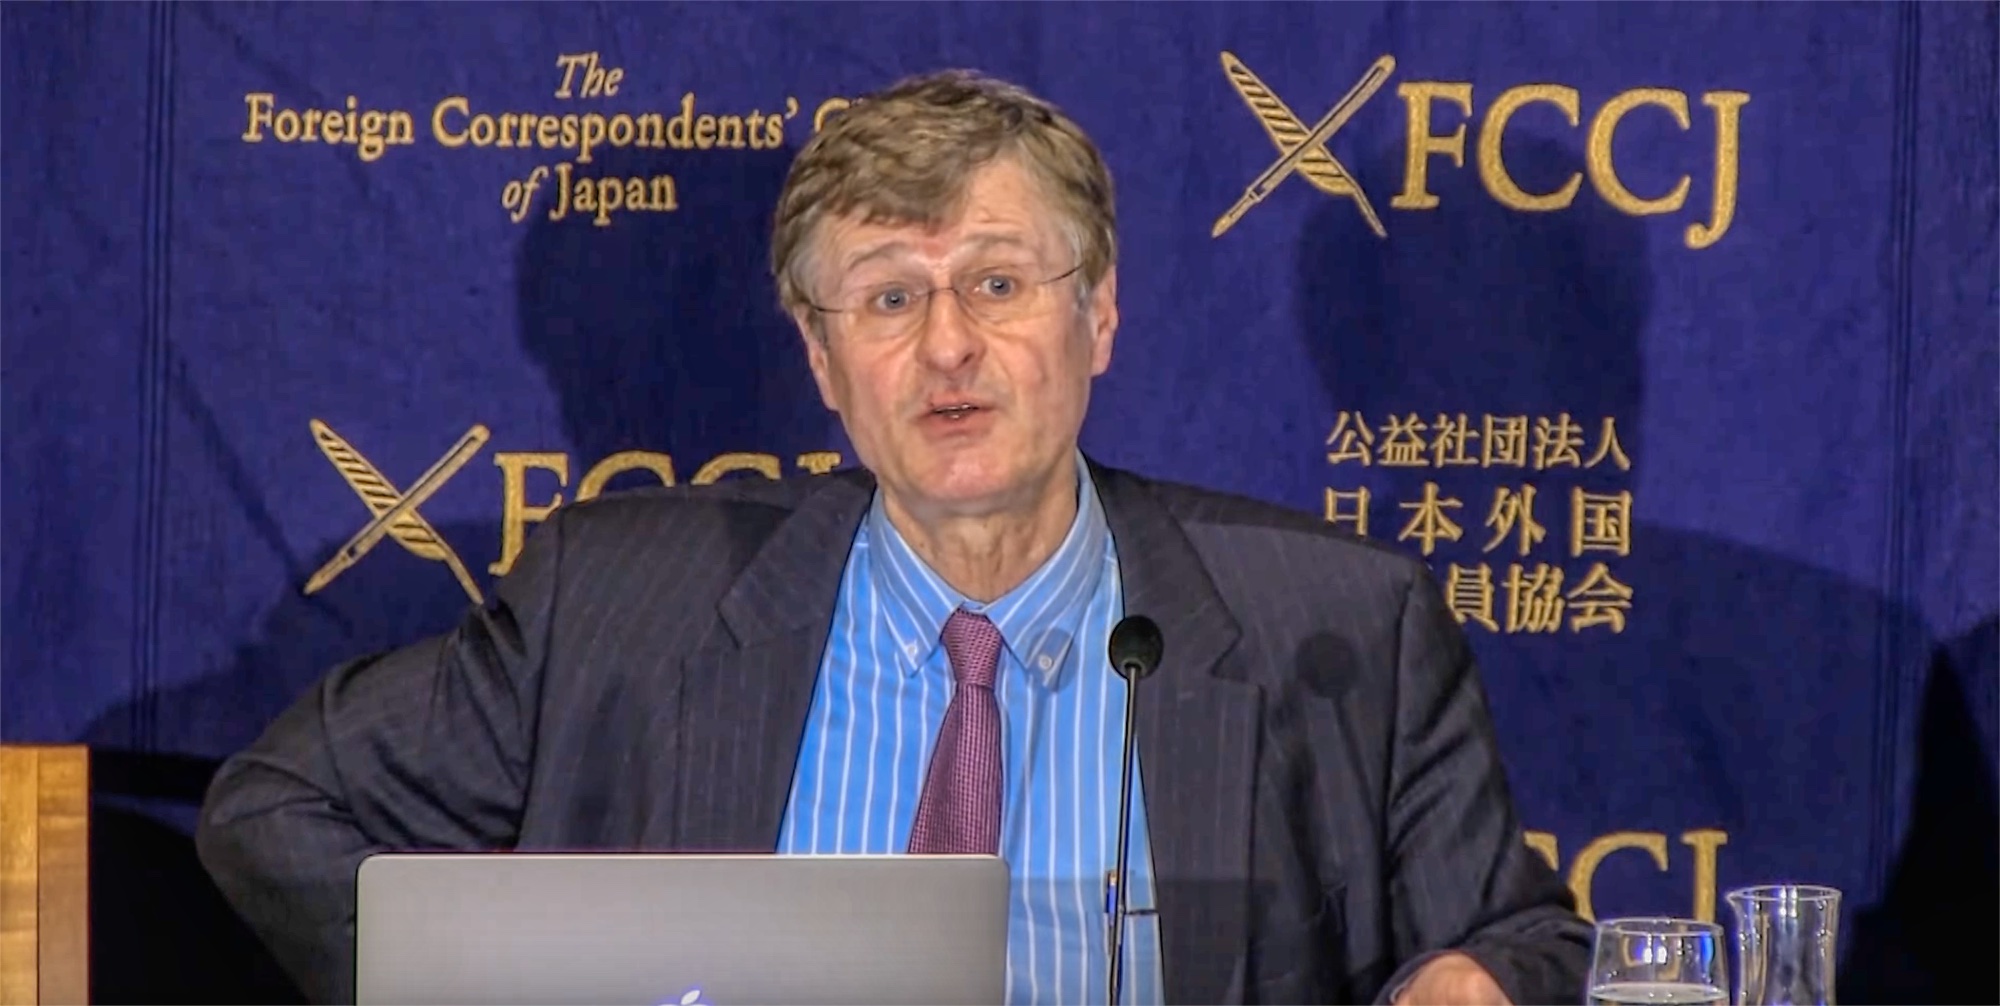 Gerhard Fasol: Corporate Governance Reforms in Japan (talk at the FCCJ Foreign Correspondents Club of Japan, in Tokyo)